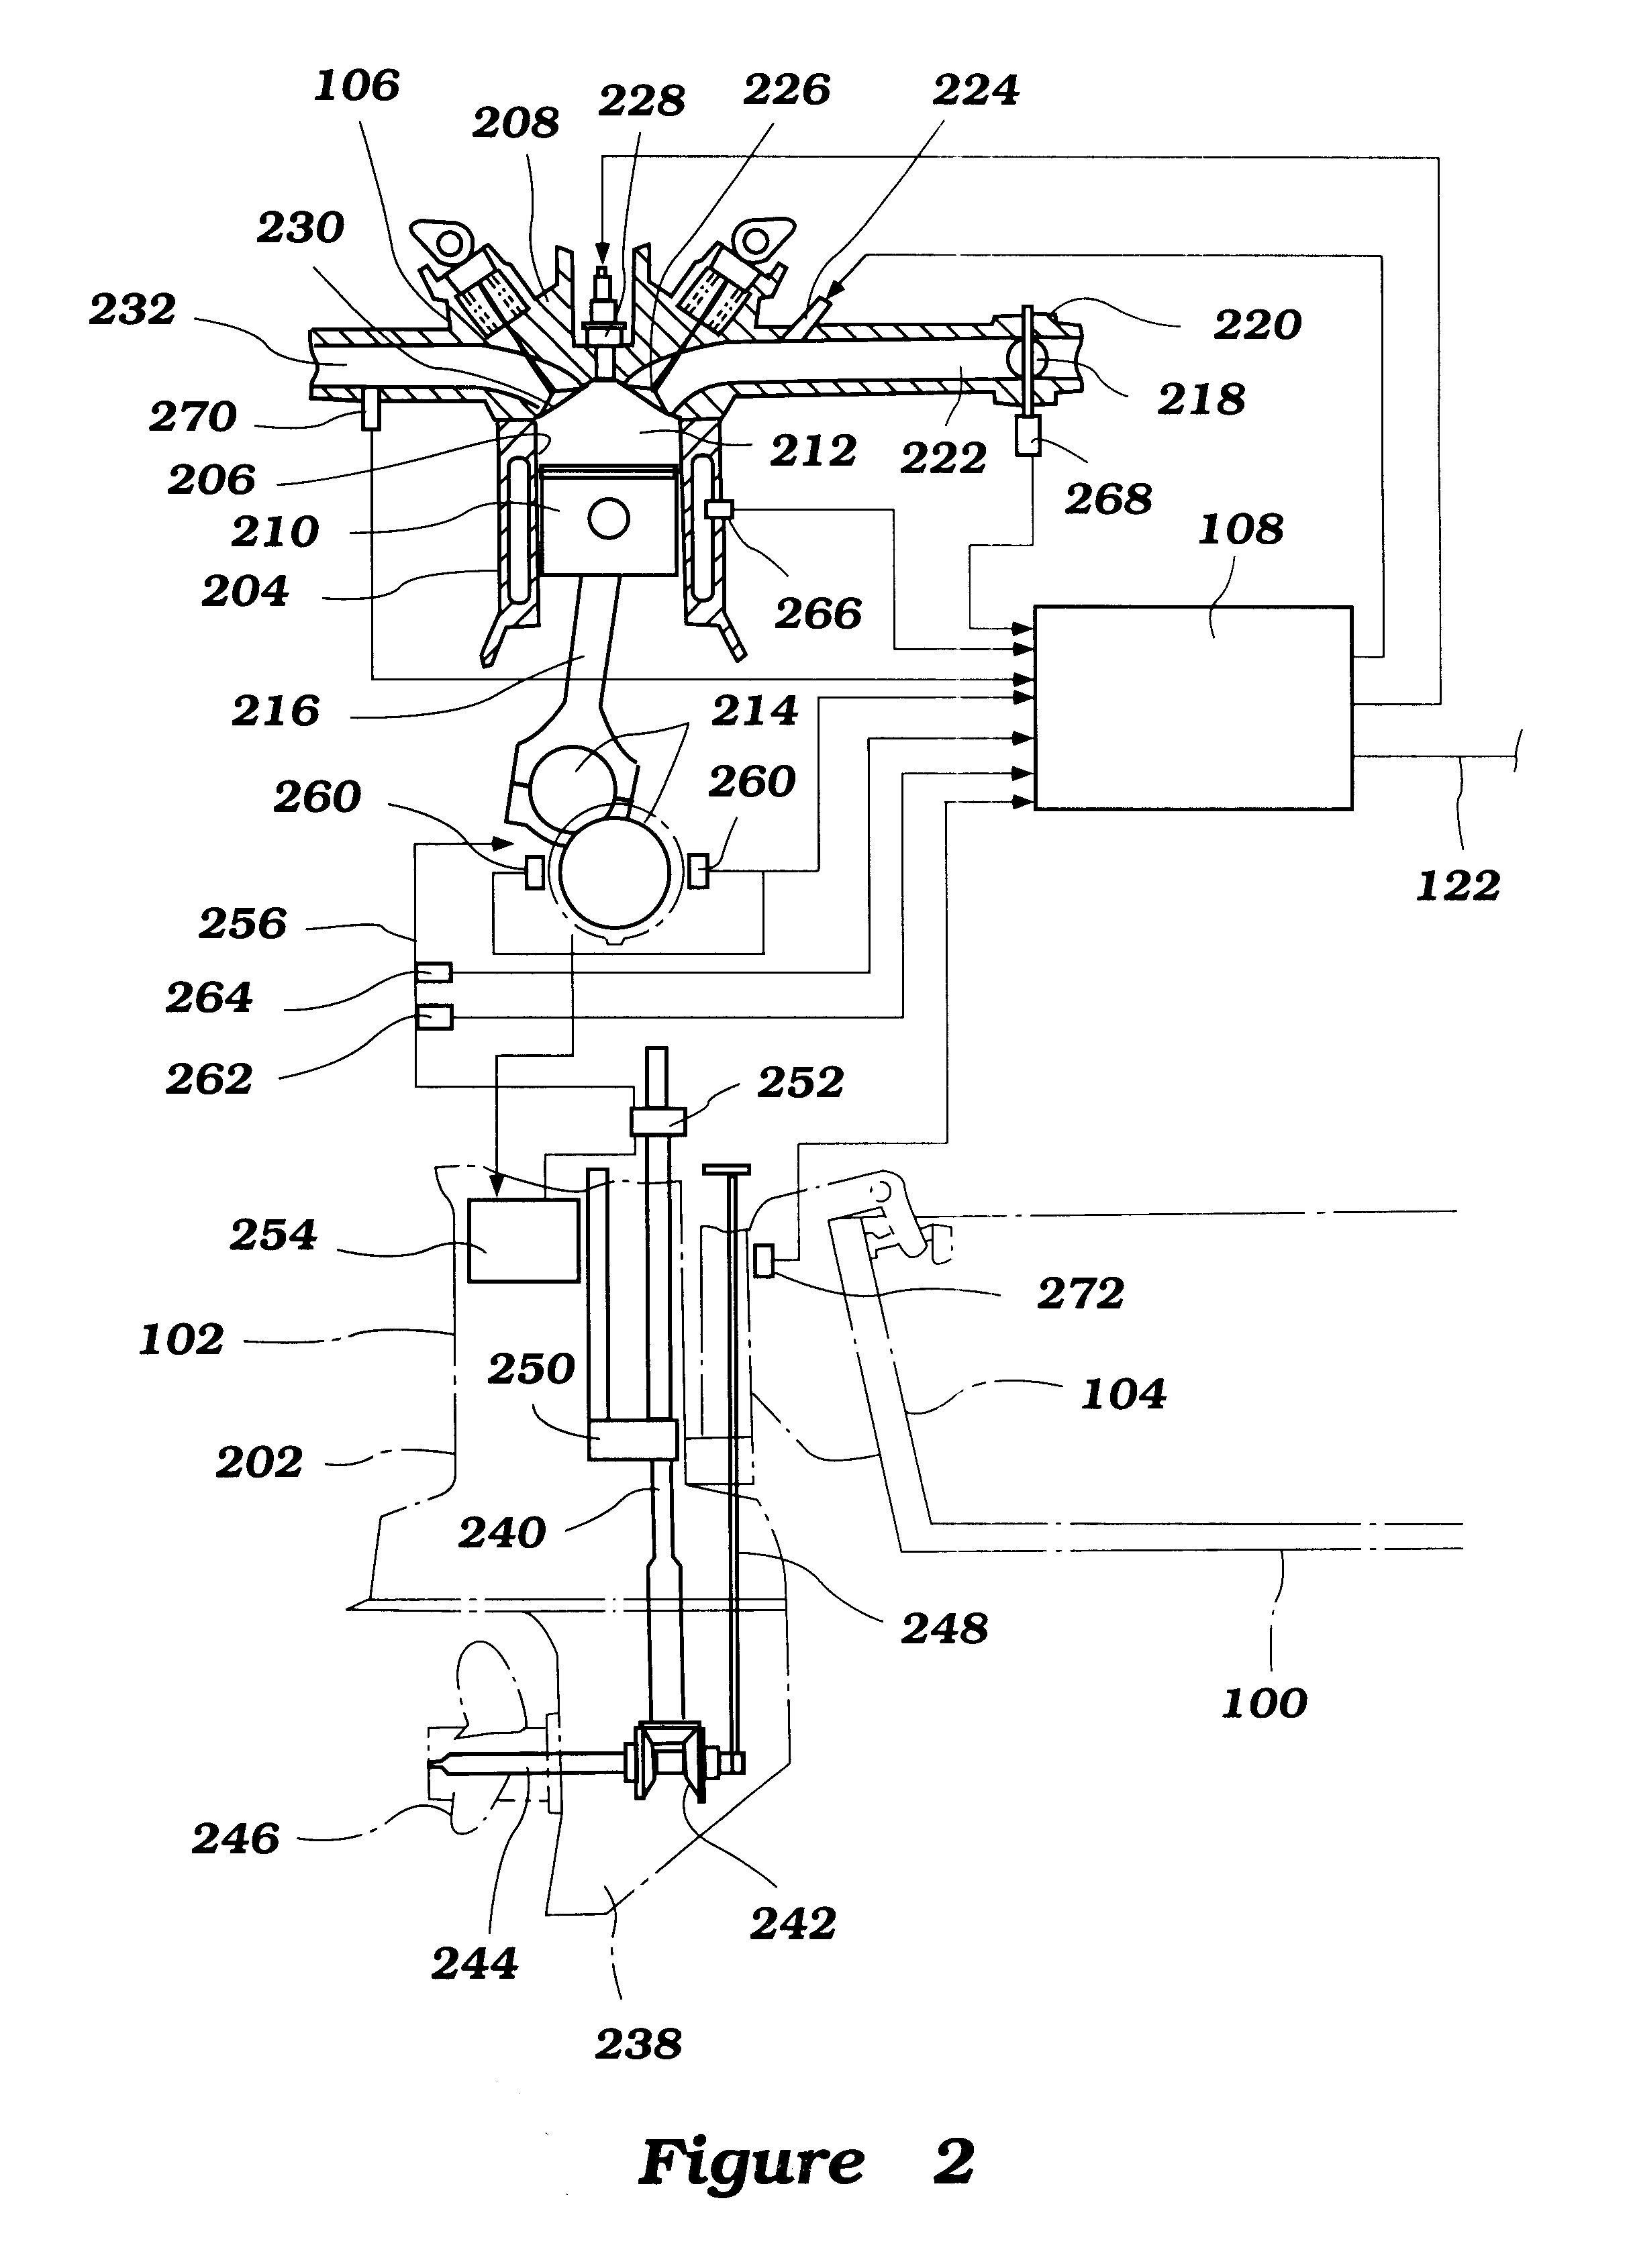 System and methods for encoding, transmitting, and displaying engine operation data